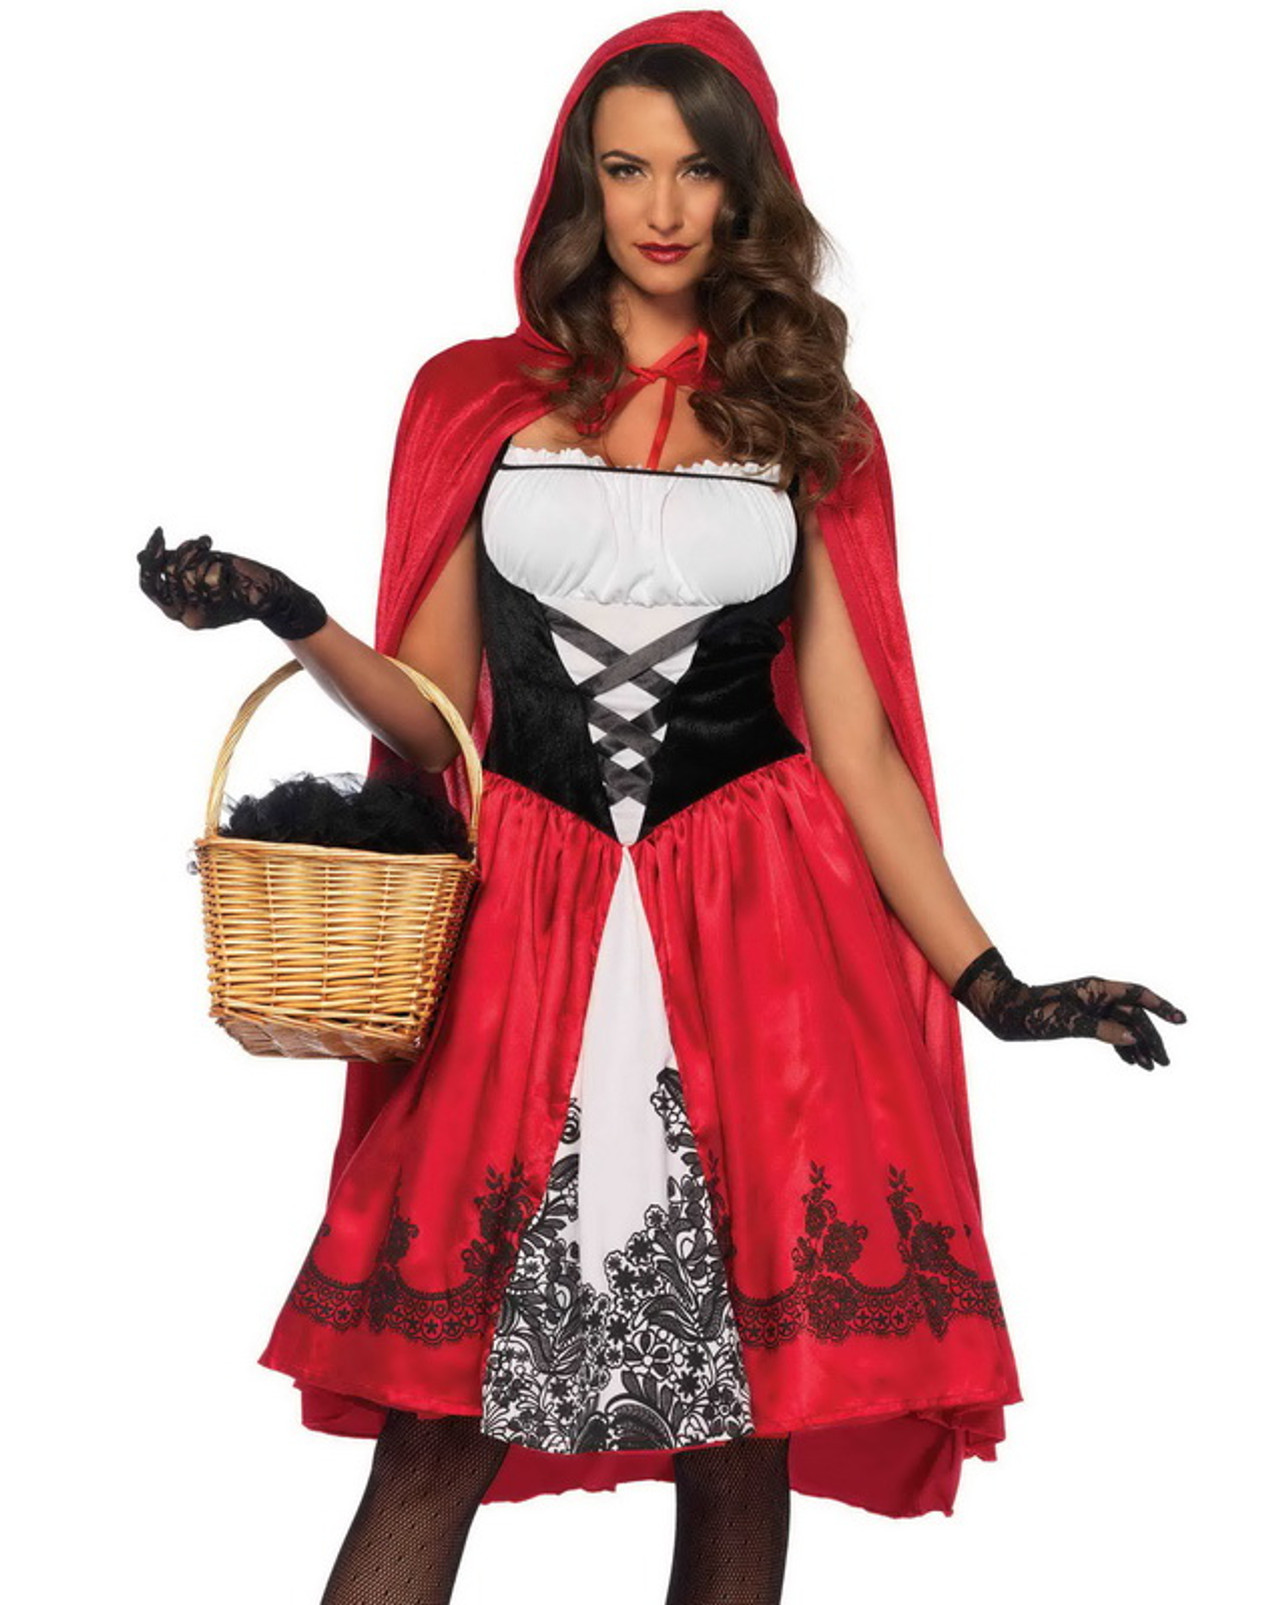 Gothic Red Riding Hood Costume Spicy Lingerie 8527